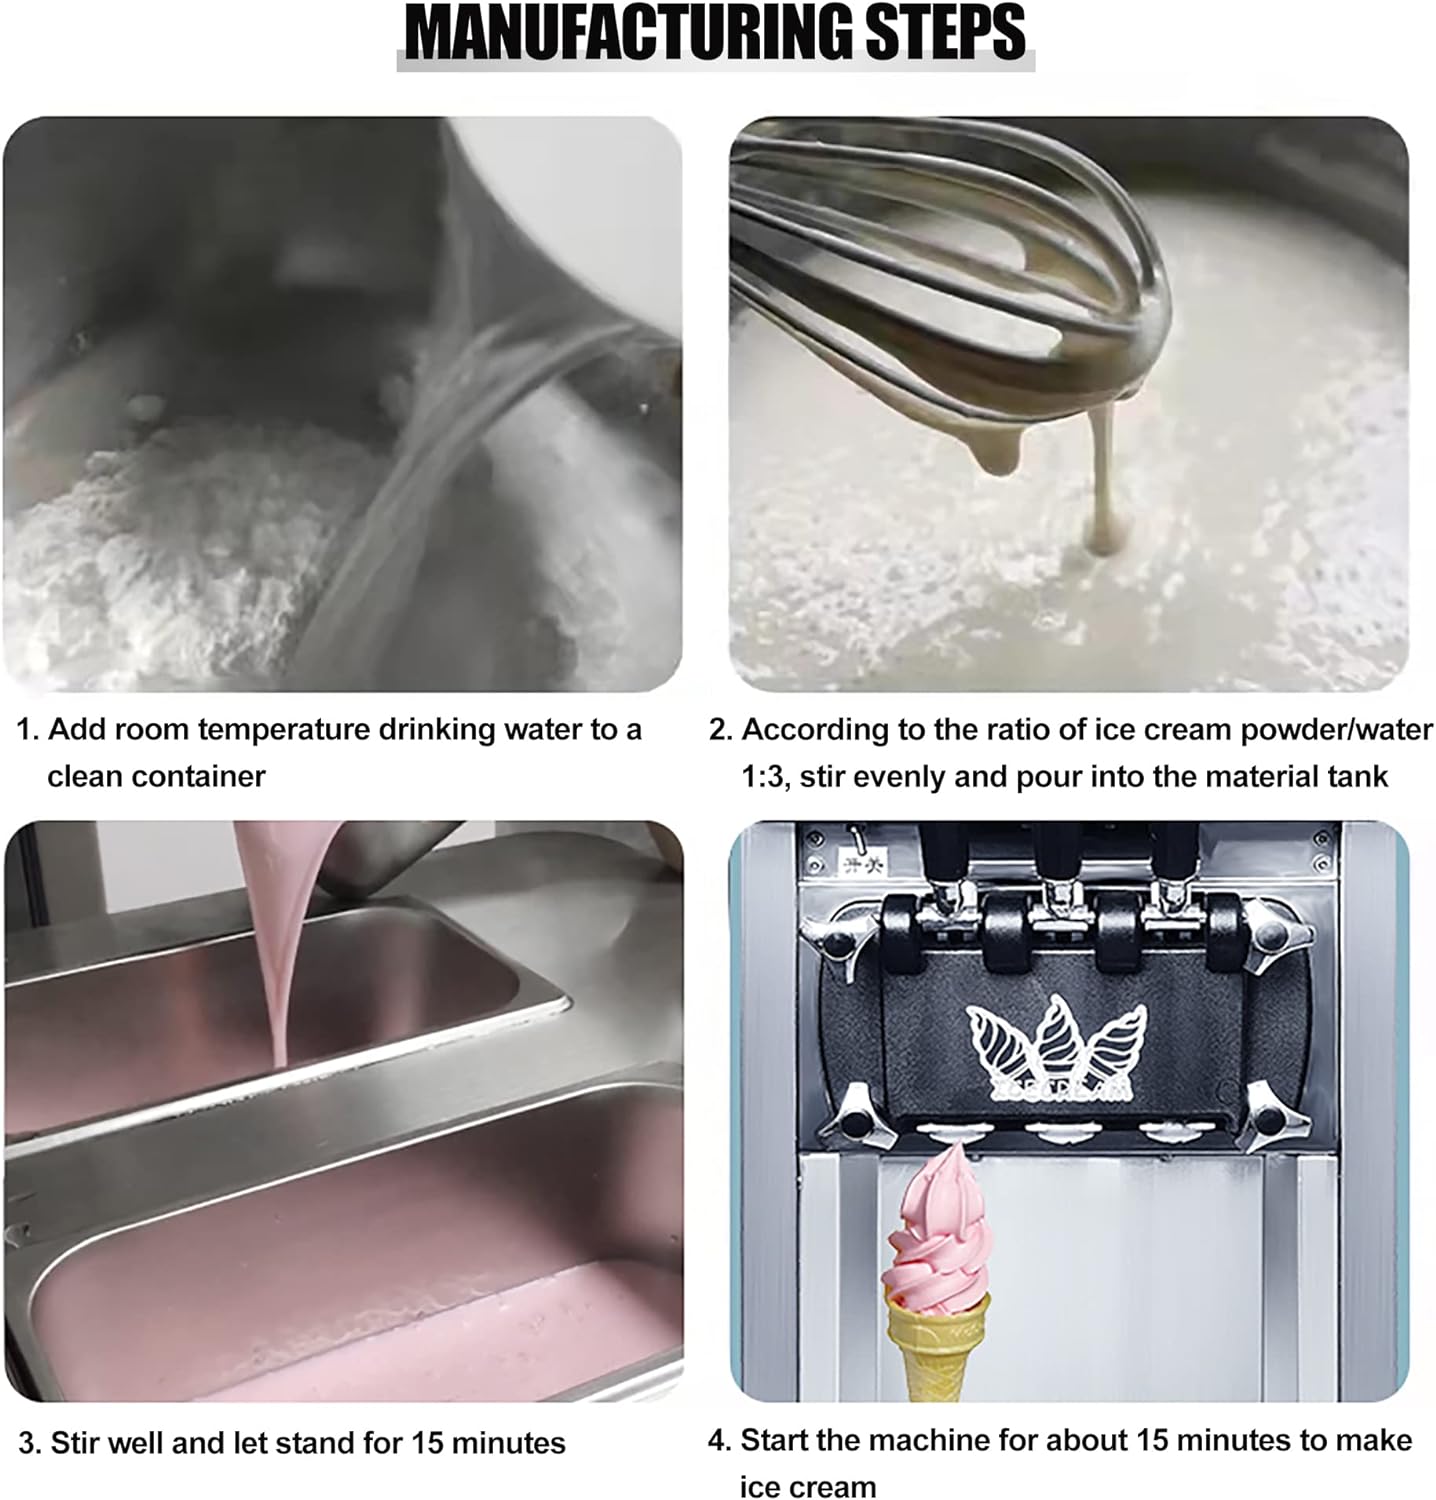 Ice Cream Maker 3 Flavors-Create Homemade Frozen Desserts, Frozen Yogurt, 3L Bowl/1.8L Freezing Cylinder Make Delicious Creamy Soft Serve Ice Cream Home Kitchen Commercial - COOLBABY